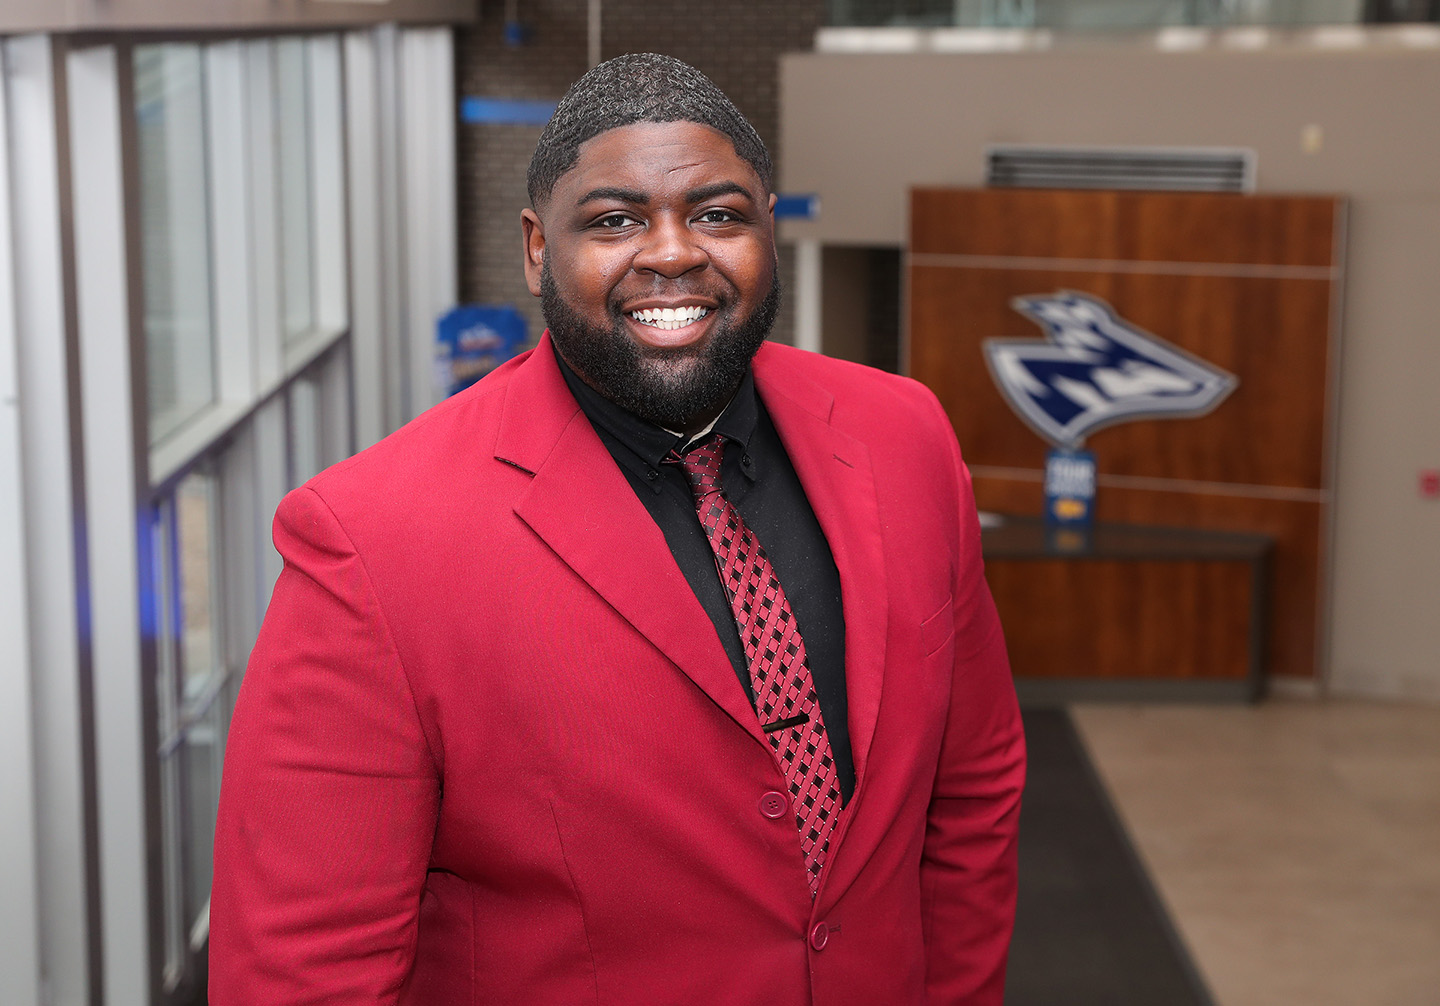 Bennett Davis Jr. is the director of community standards and student conduct at UNK, where he also serves as an adviser for the Black Student Association and teaches a leadership course. (Photos by Erika Pritchard, UNK Communications)